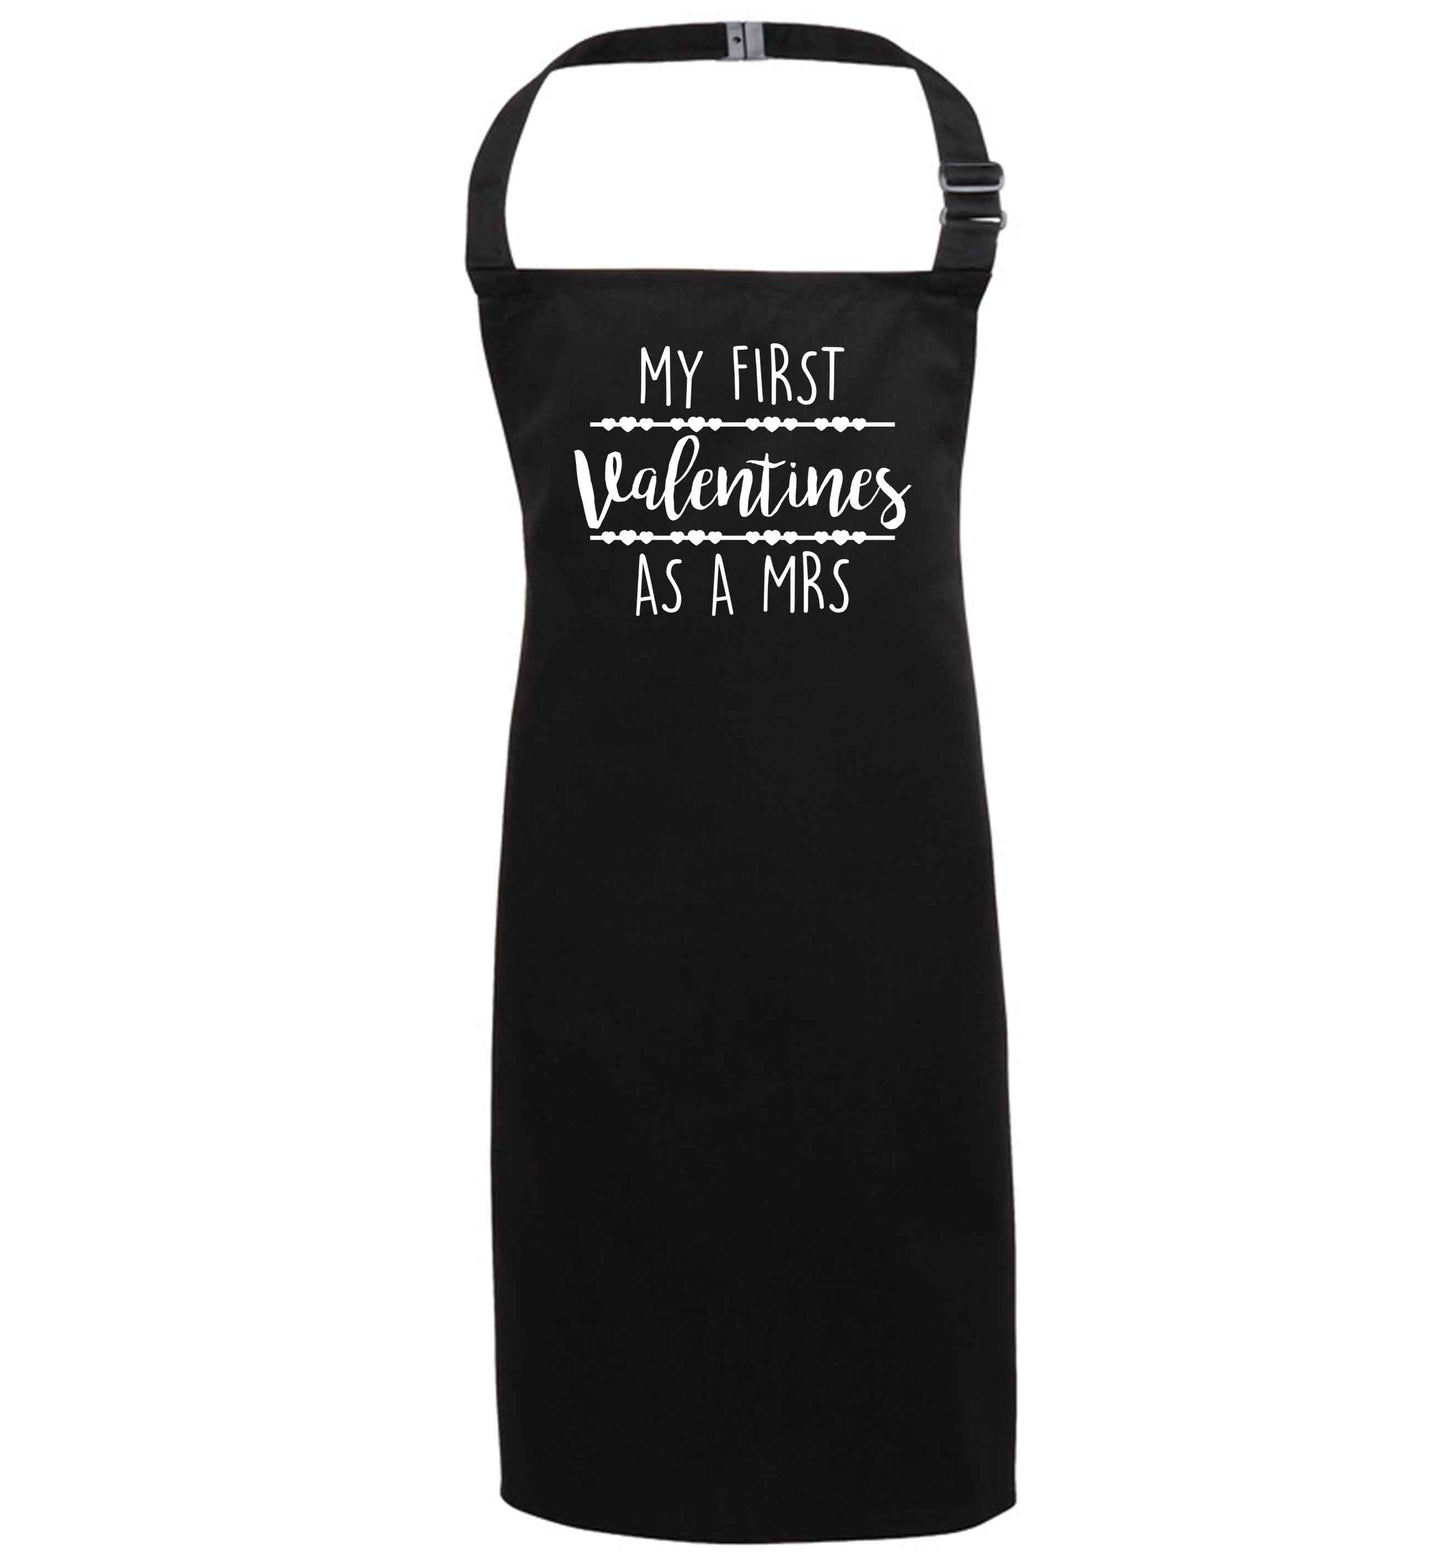 My first valentines as a Mrs black apron 7-10 years